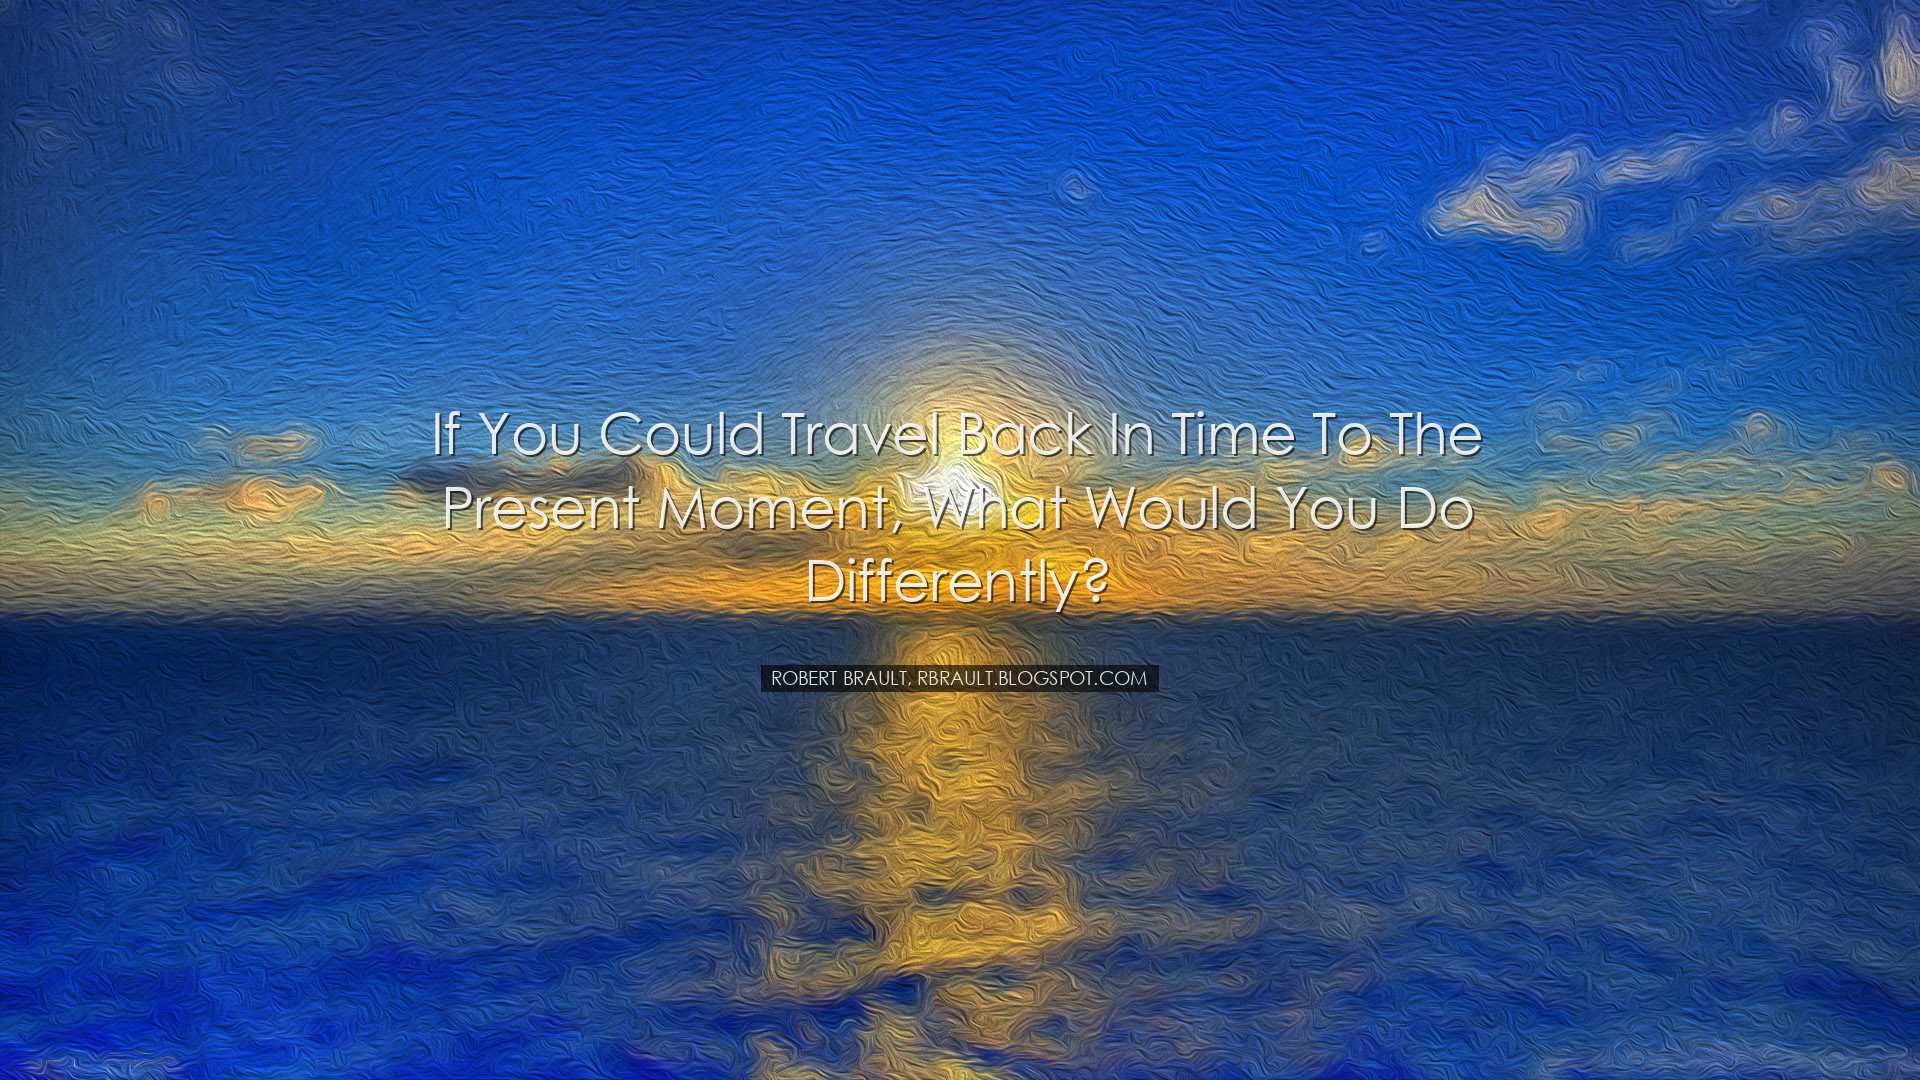 If you could travel back in time to the present moment, what would